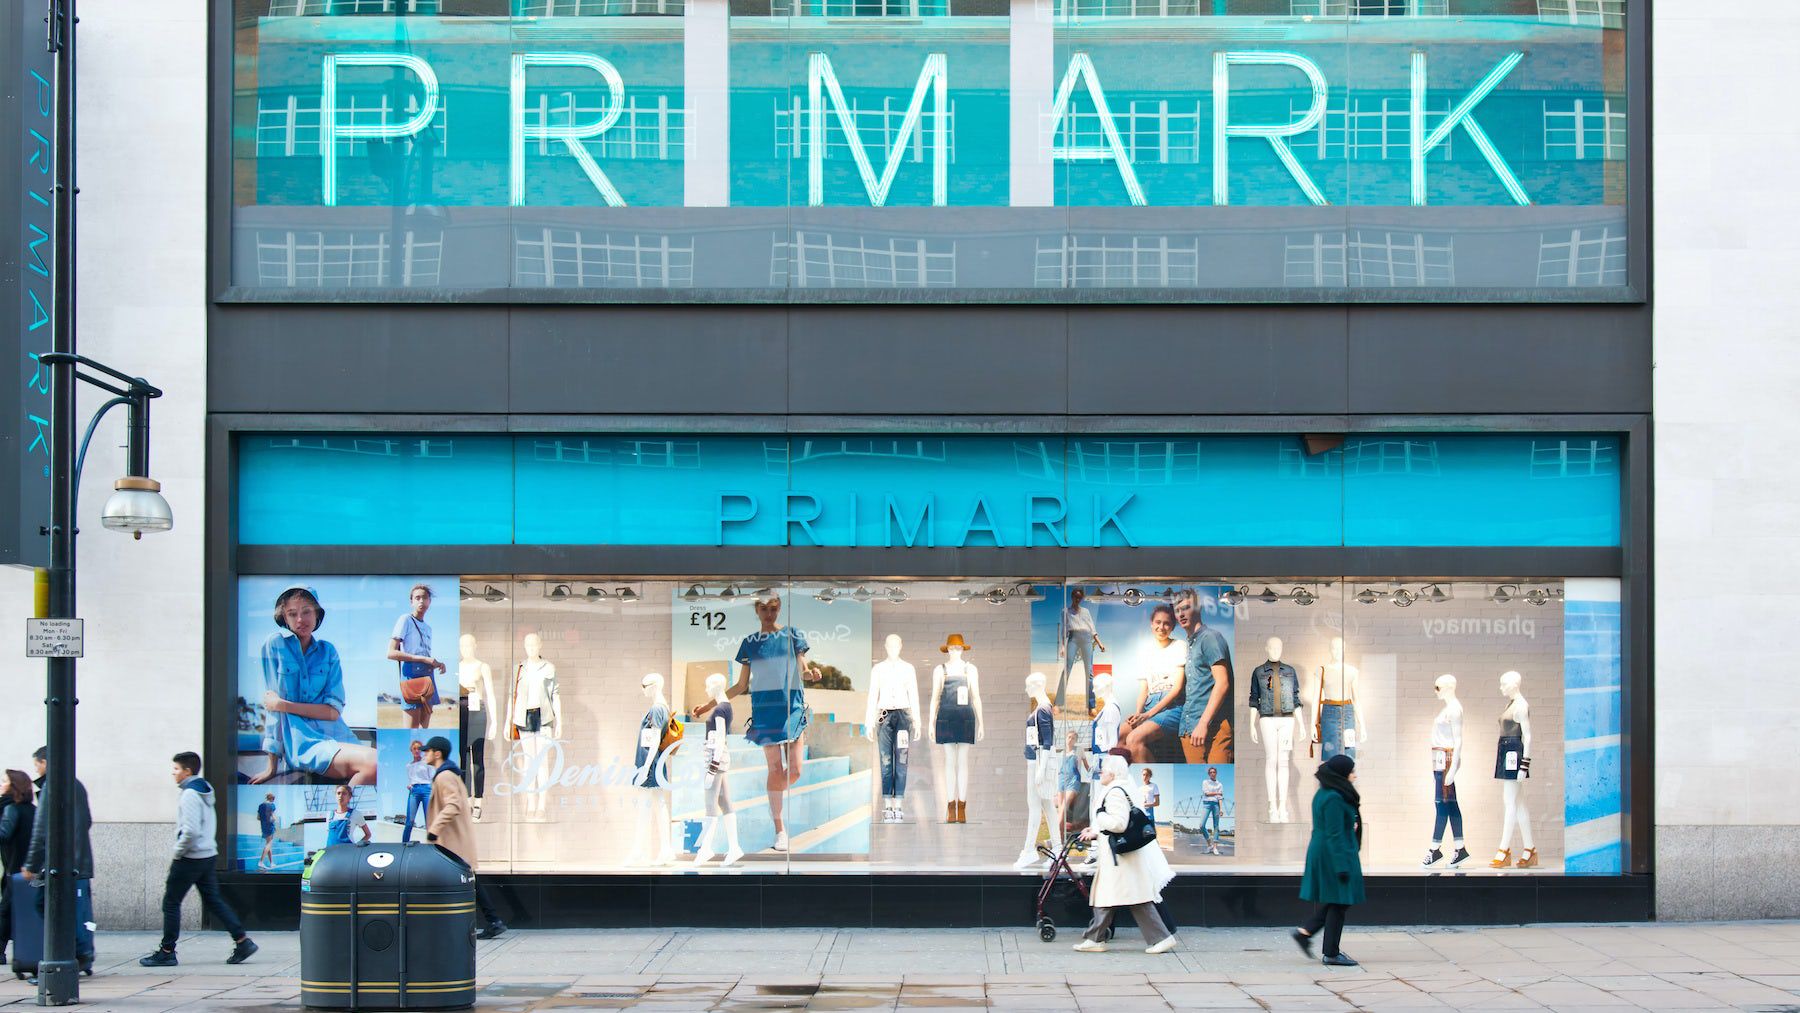 Primark Owner Sees Bigger Fashion Profit as Inflation Fades